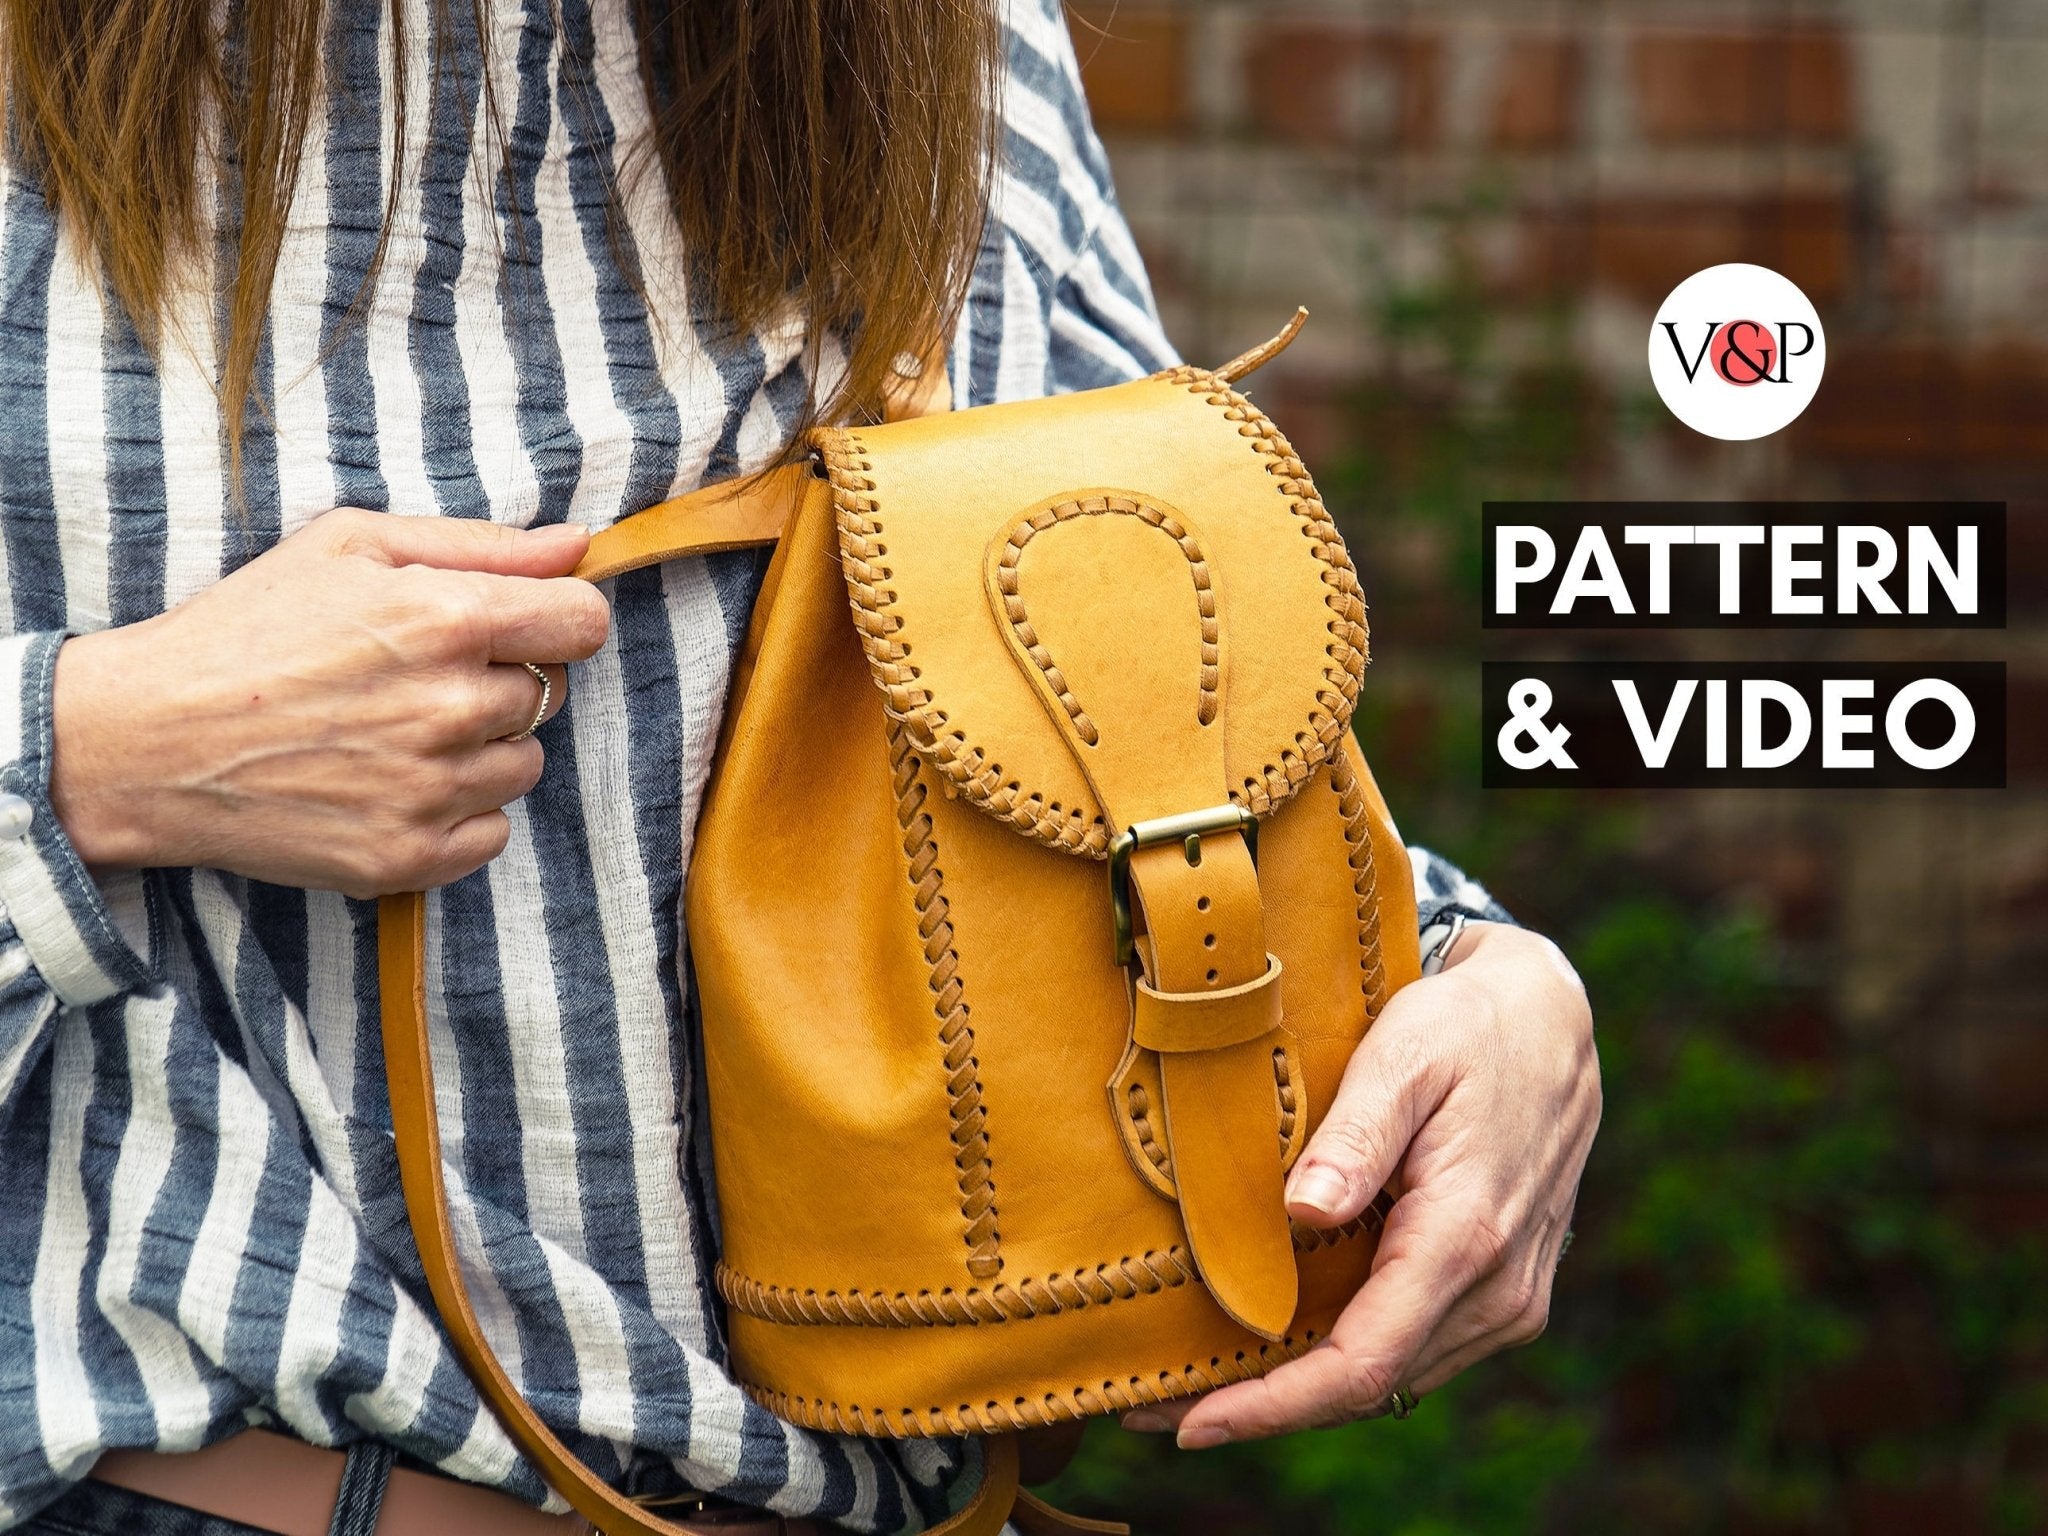 Mini Backpack Magda PDF Pattern, Video Tutorial, Laced Leather Backpack, Small Backpack Vasile and Pavel 